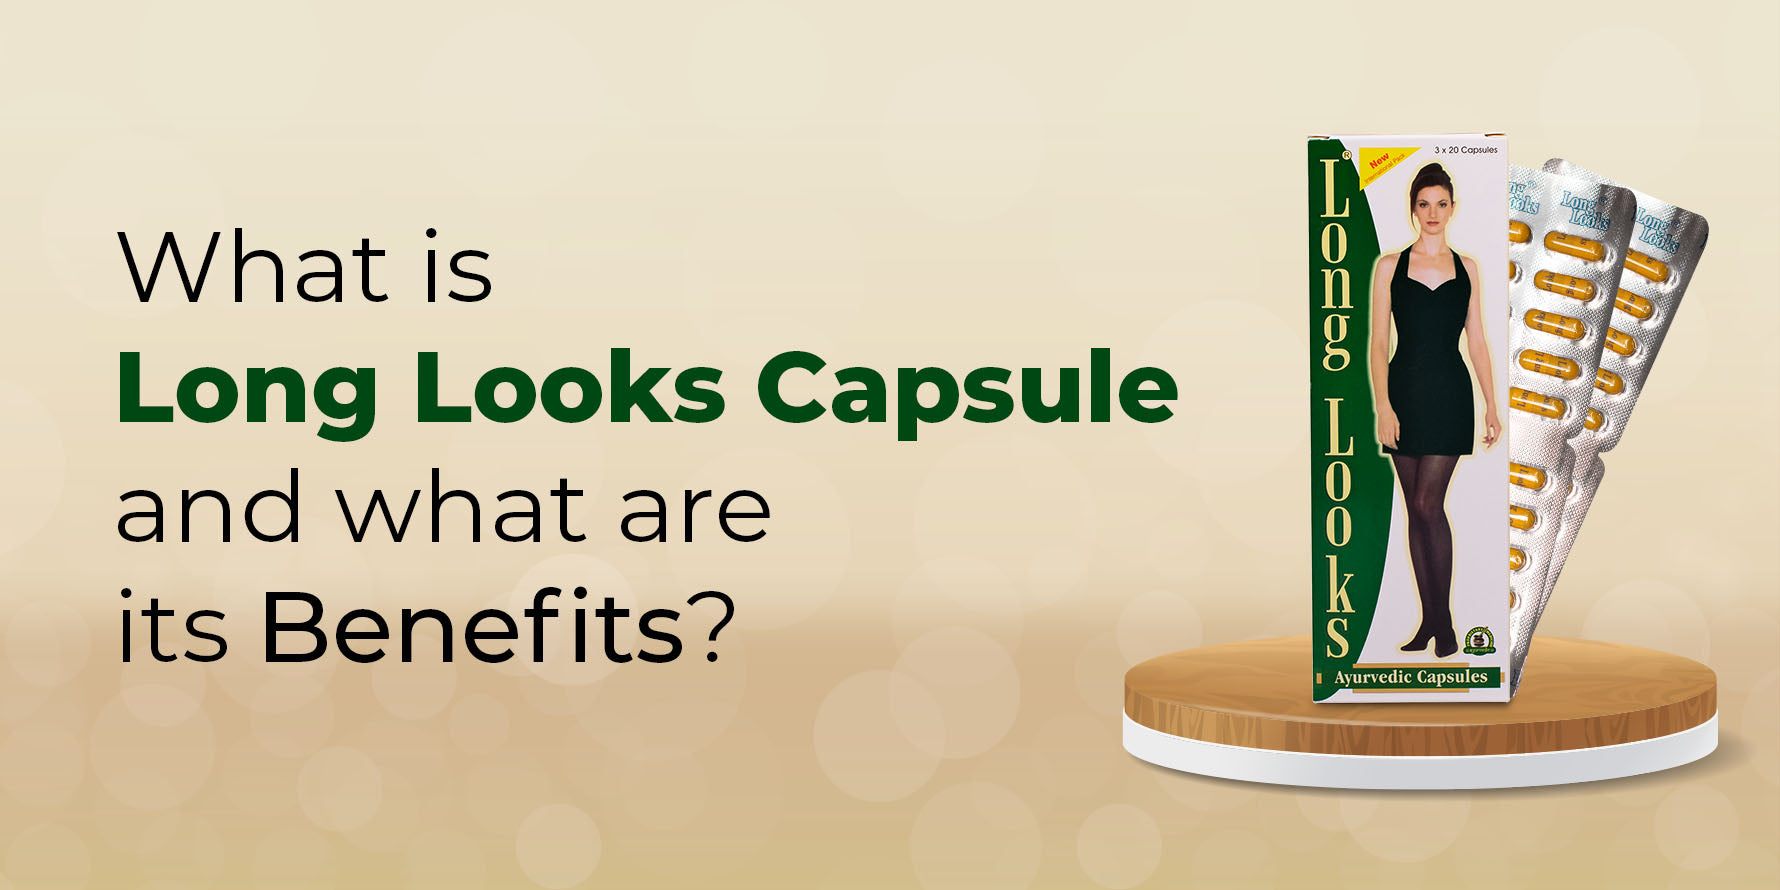 What is a Long Looks Capsule and what are its Benefits